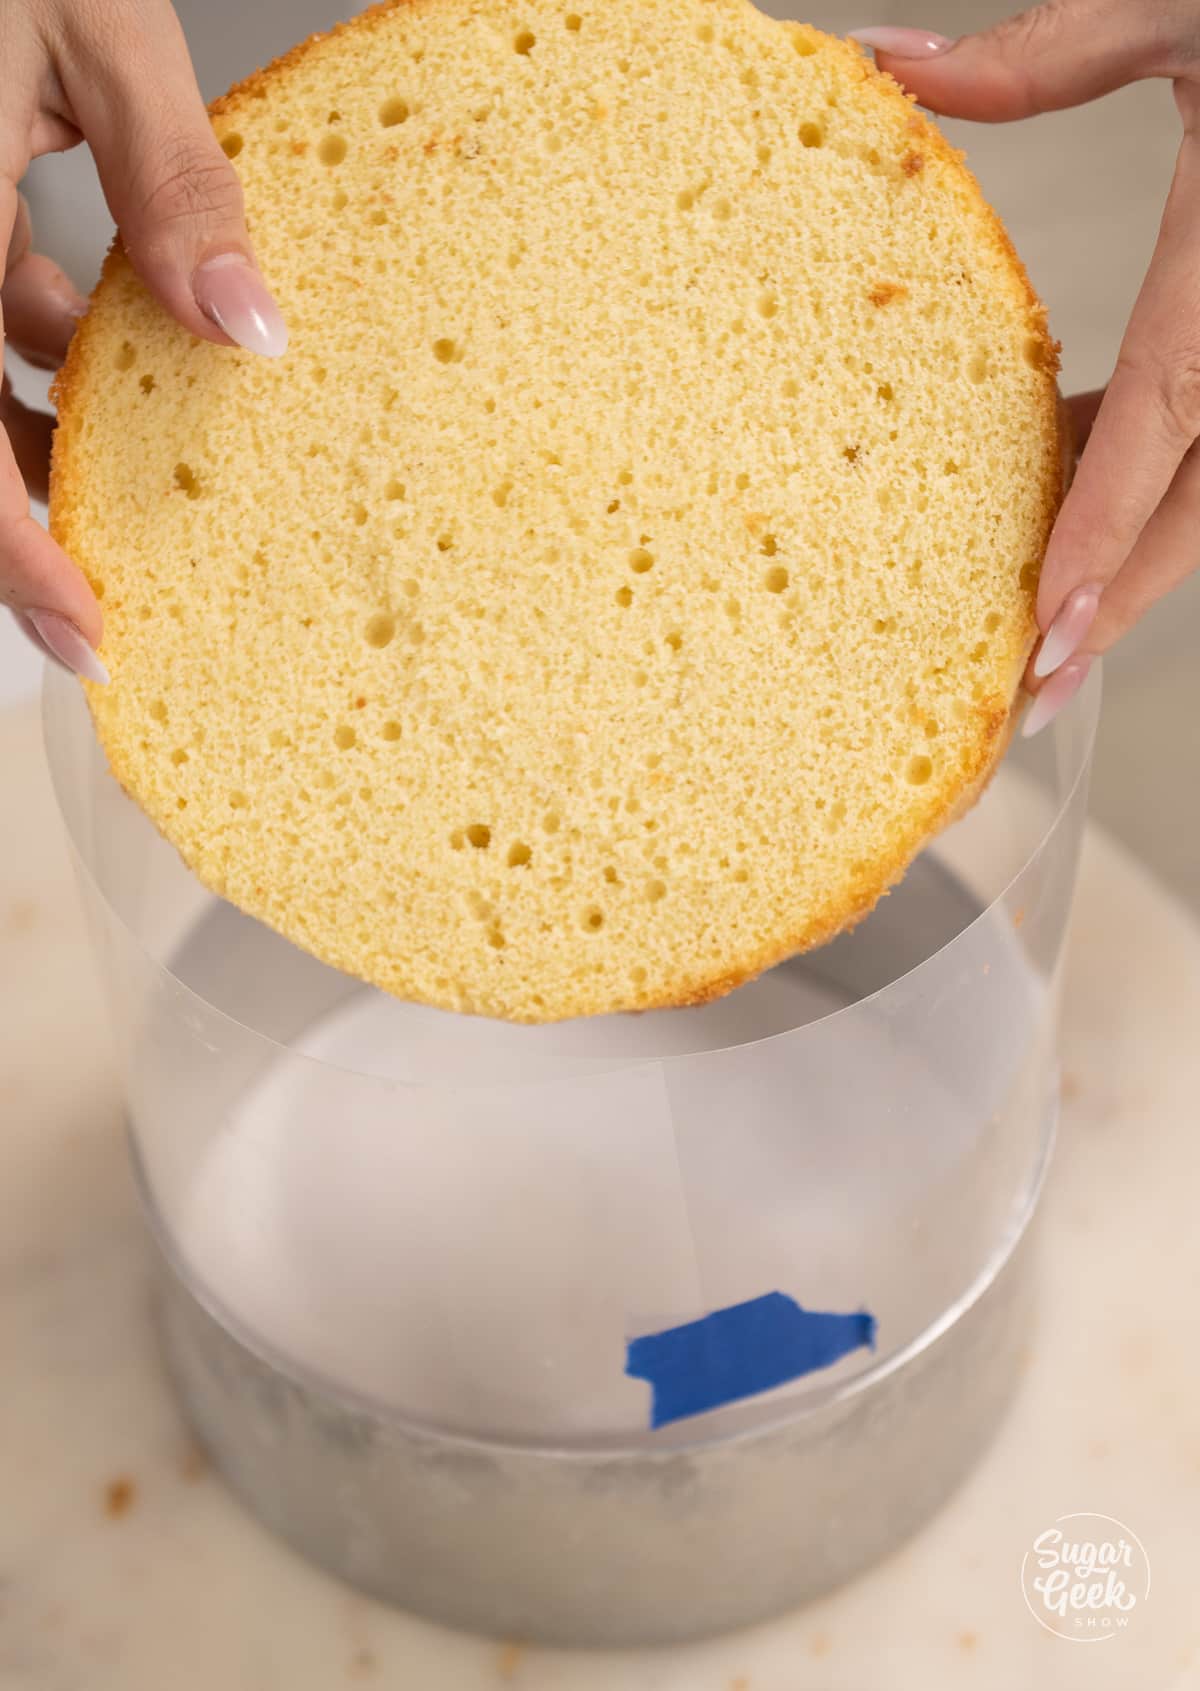 hands placing cake layer into a cake ring lined with an acetate sheet.